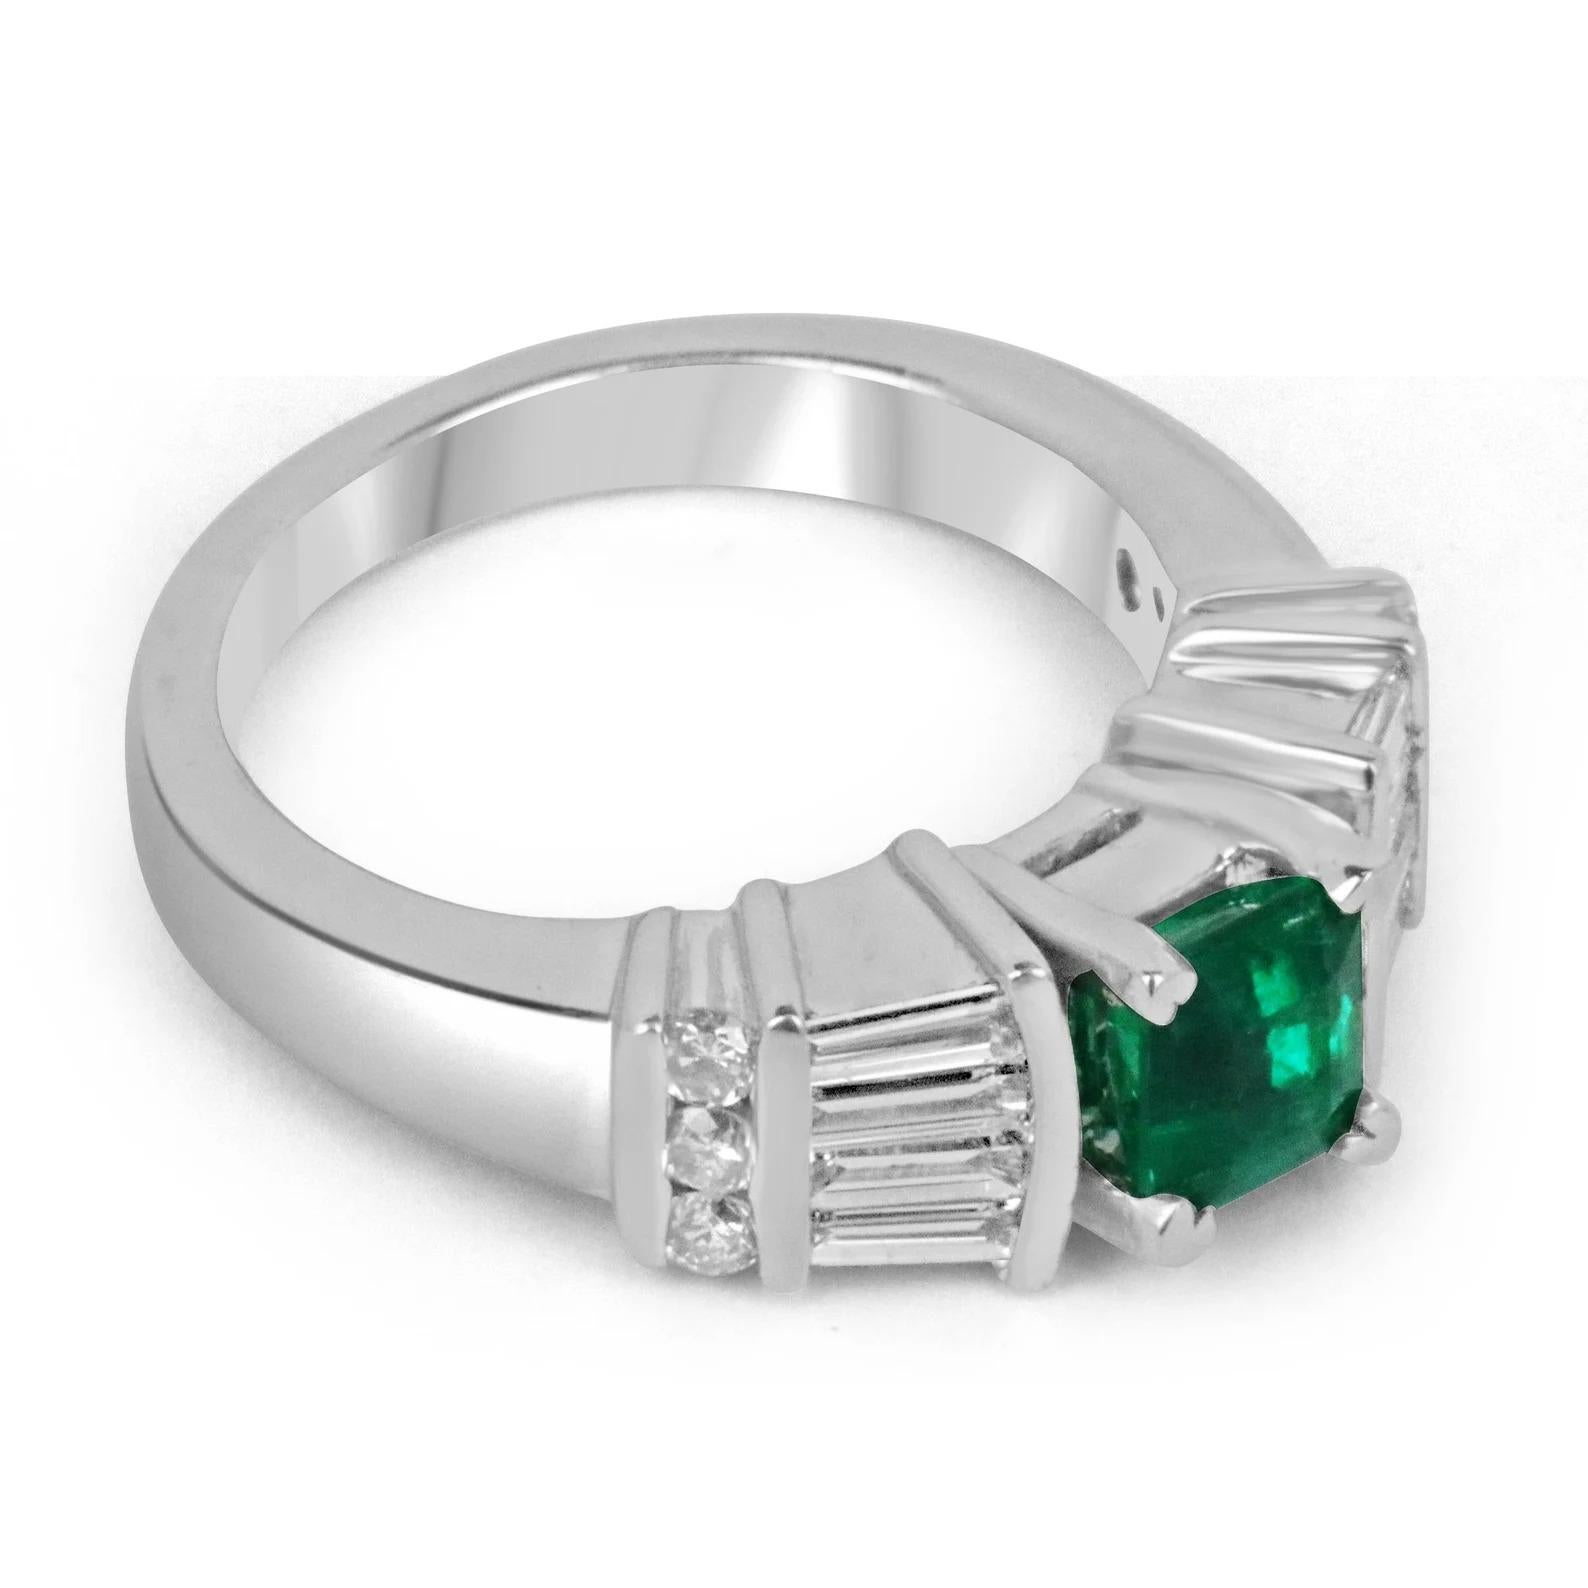 An exquisite fine quality AAA Colombian emerald and diamond ring. The center gemstone showcases almost a full carat of pure Colombian, AAA+ emerald goodness! Displaying the most enthralling, vivid, dark green color and excellent luster. Set in a